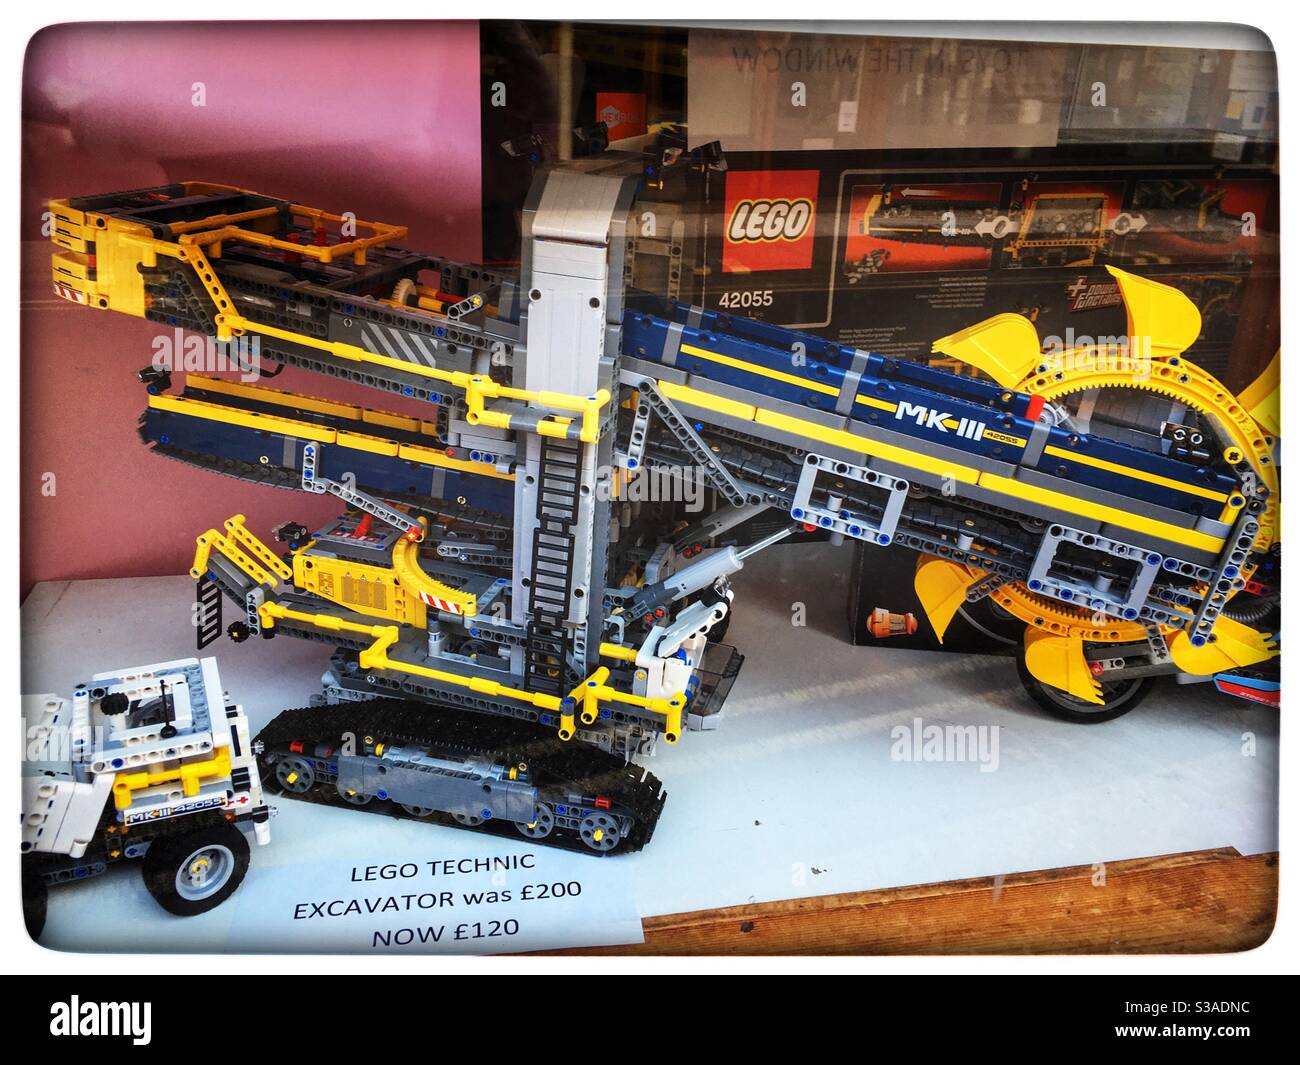 LEGO Technic excavator in the window of a toy shop Stock Photo - Alamy